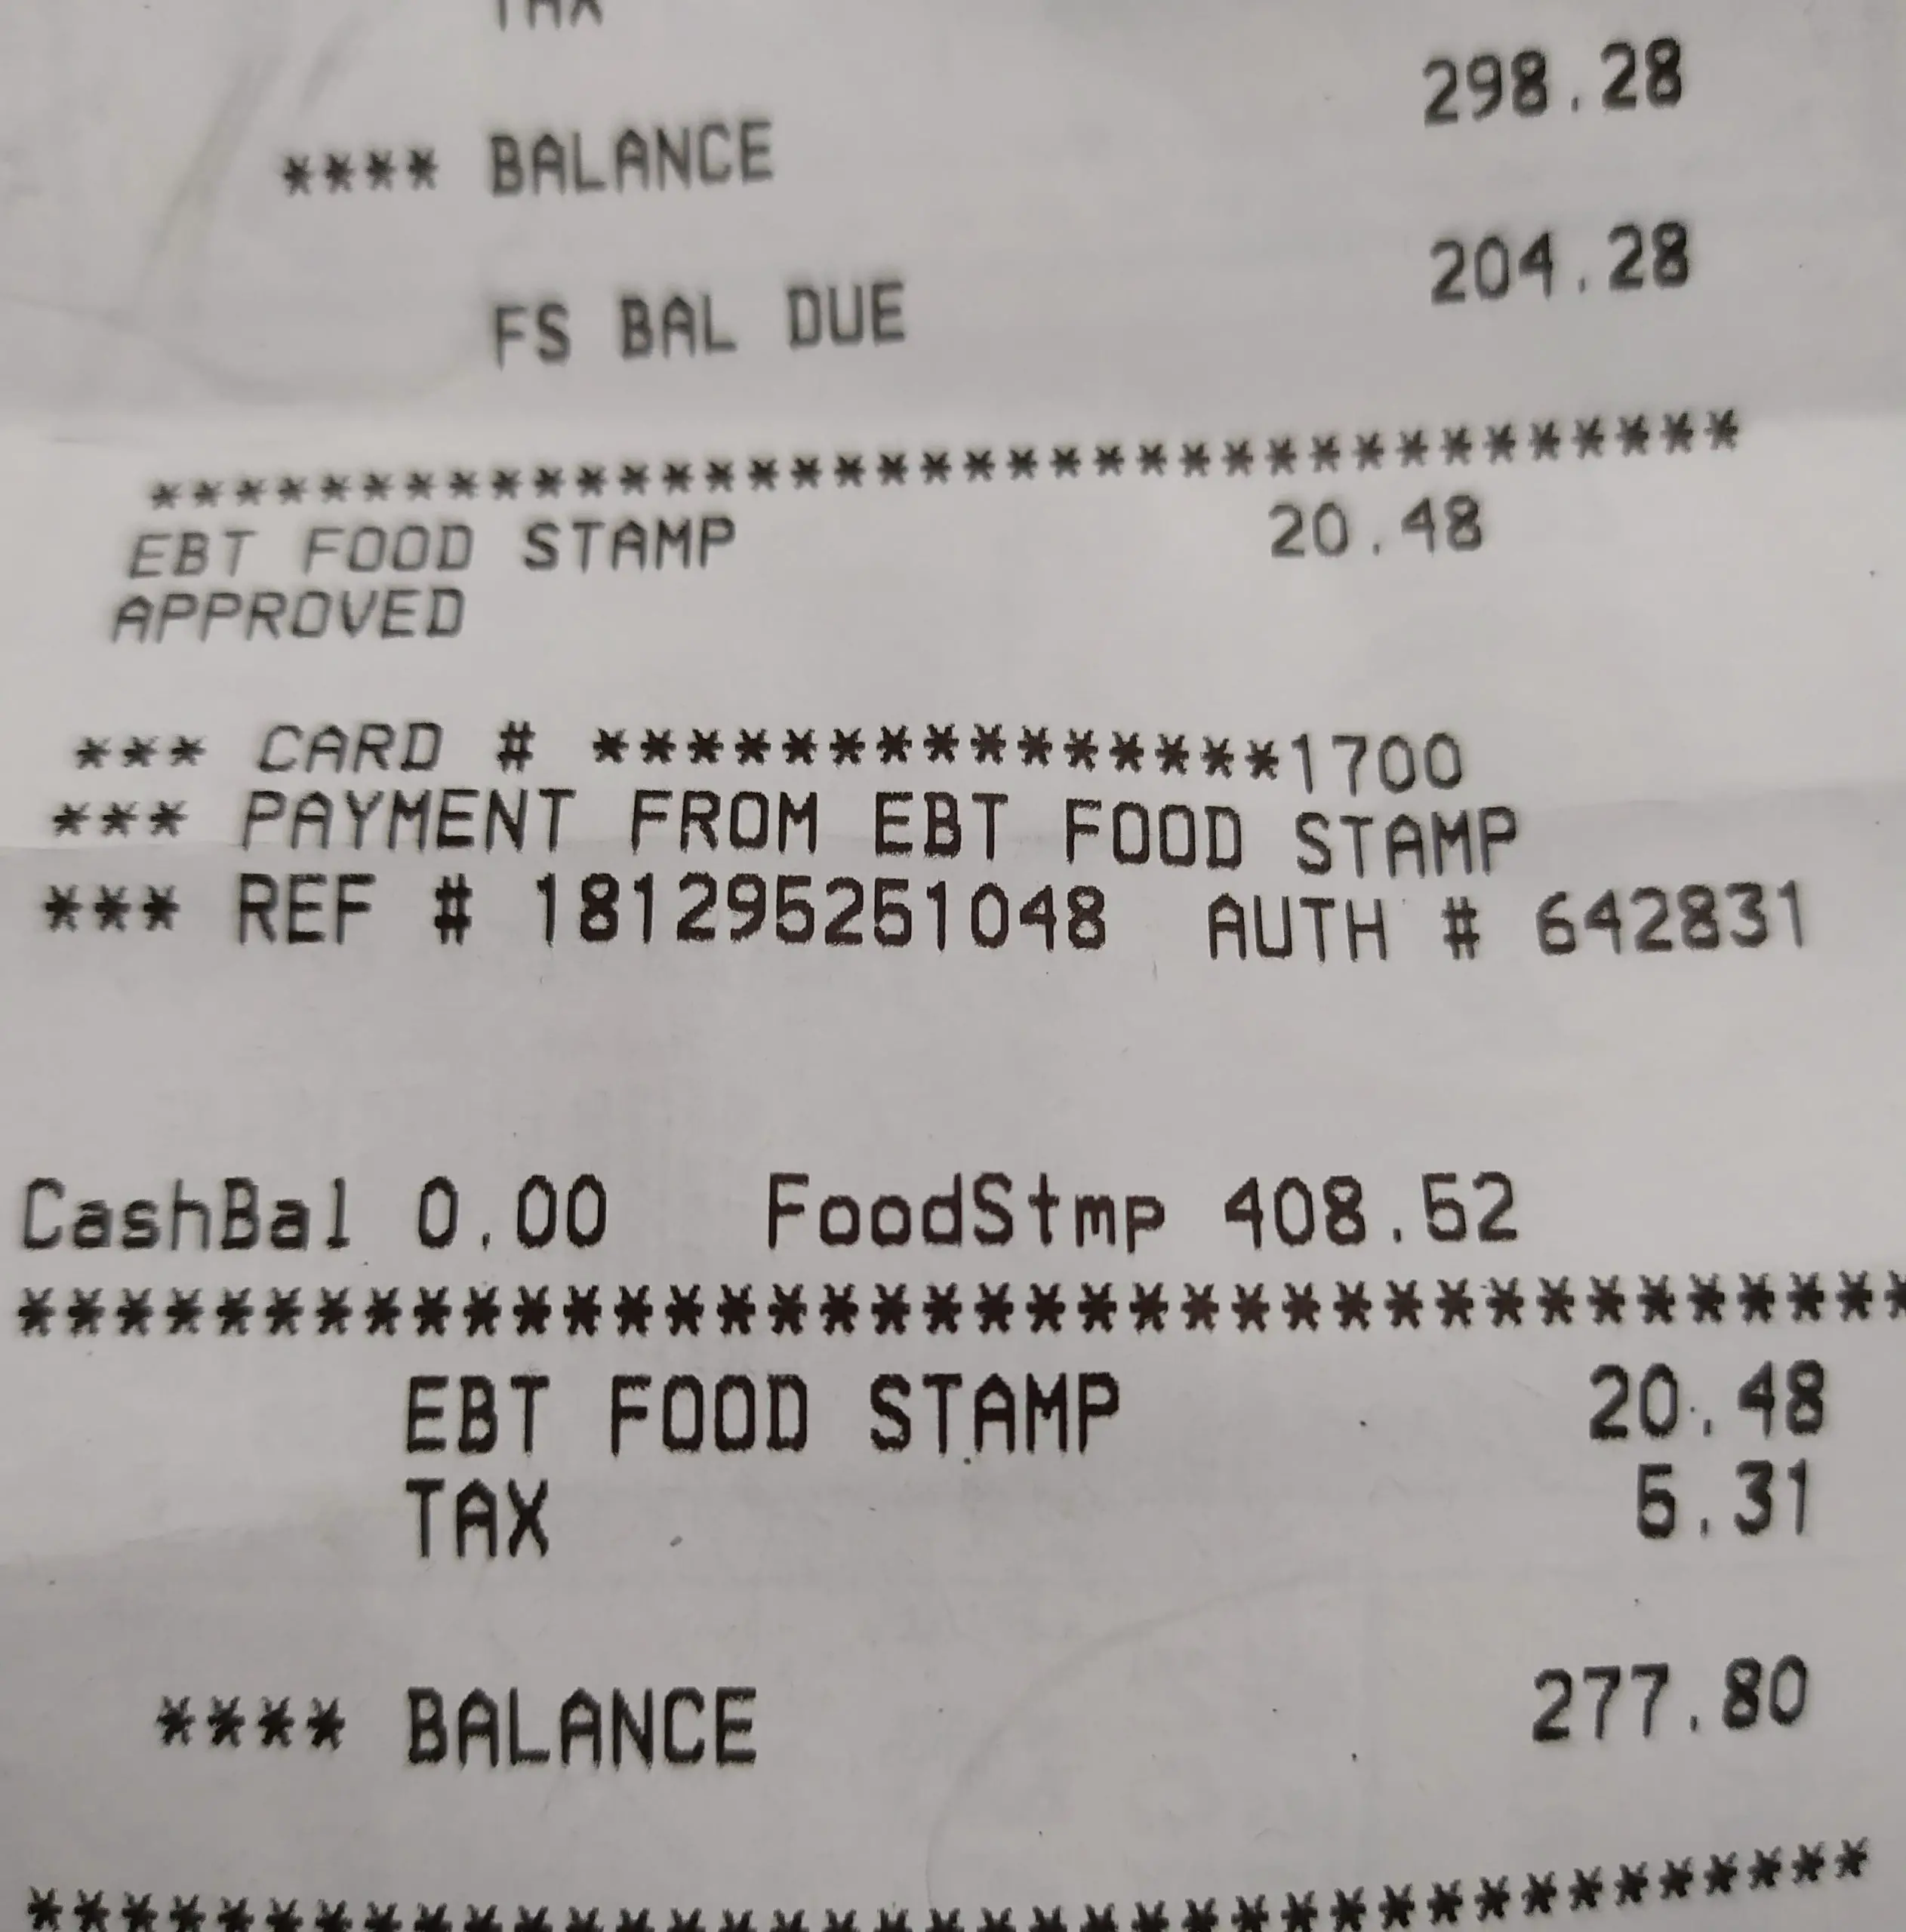 Why did food stamps only cover $20 while my balance is apparently $408 ...